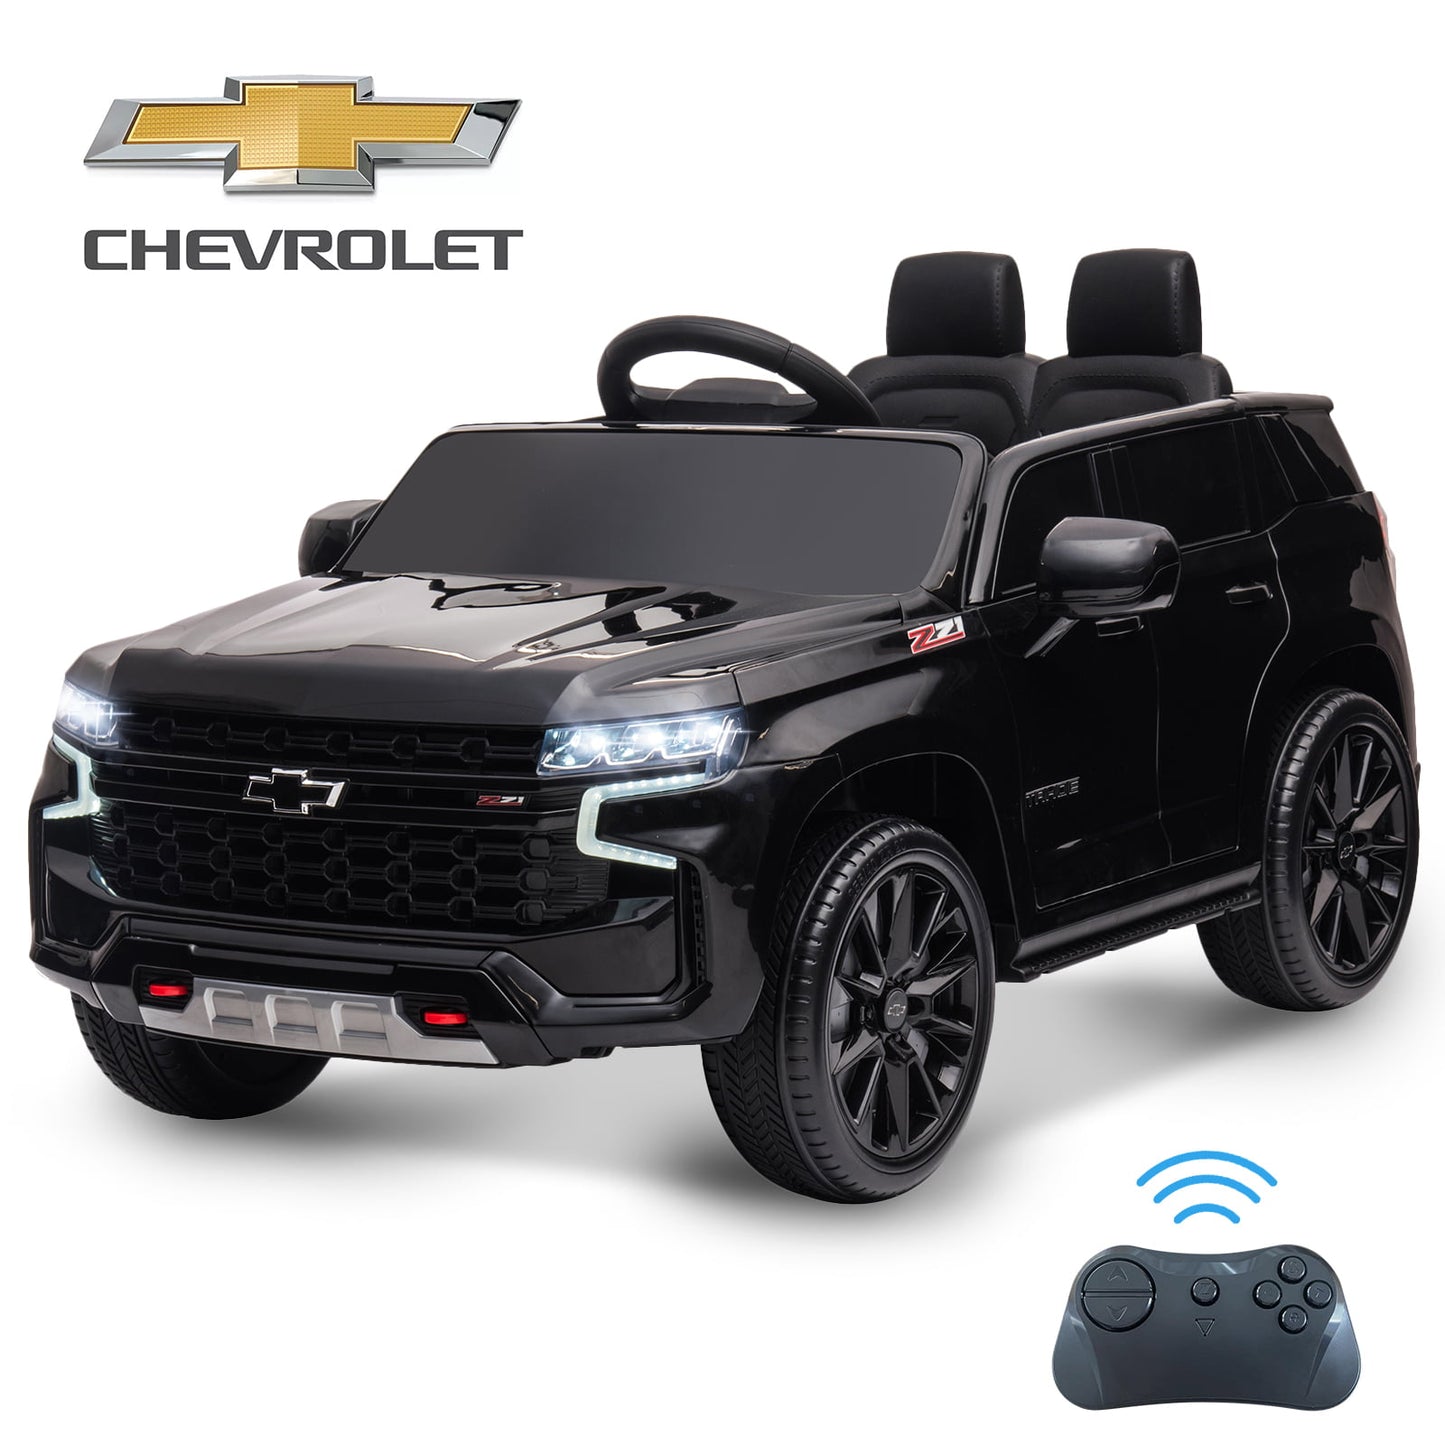 Syngar Chevrolet 12V Battery Powered Car Toy for Girls Boys, Kids Ride on Car with Remote Control, LED Light, MP3, Bluetooth, Seat Belt, Electric Truck for 3+ Kids Birthday Gift, Black